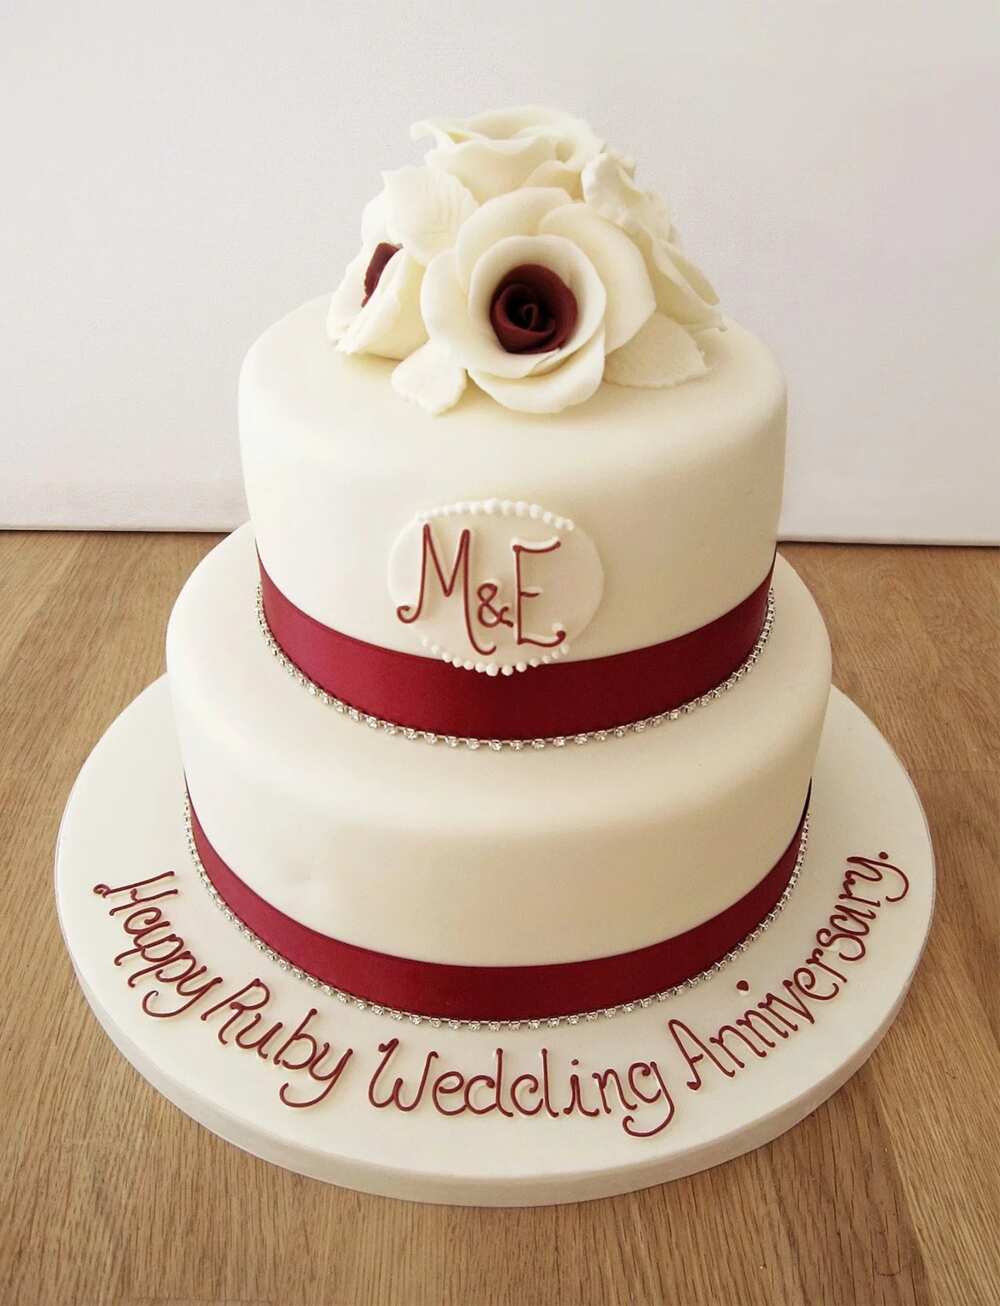 Ruby wedding anniversary cake with names